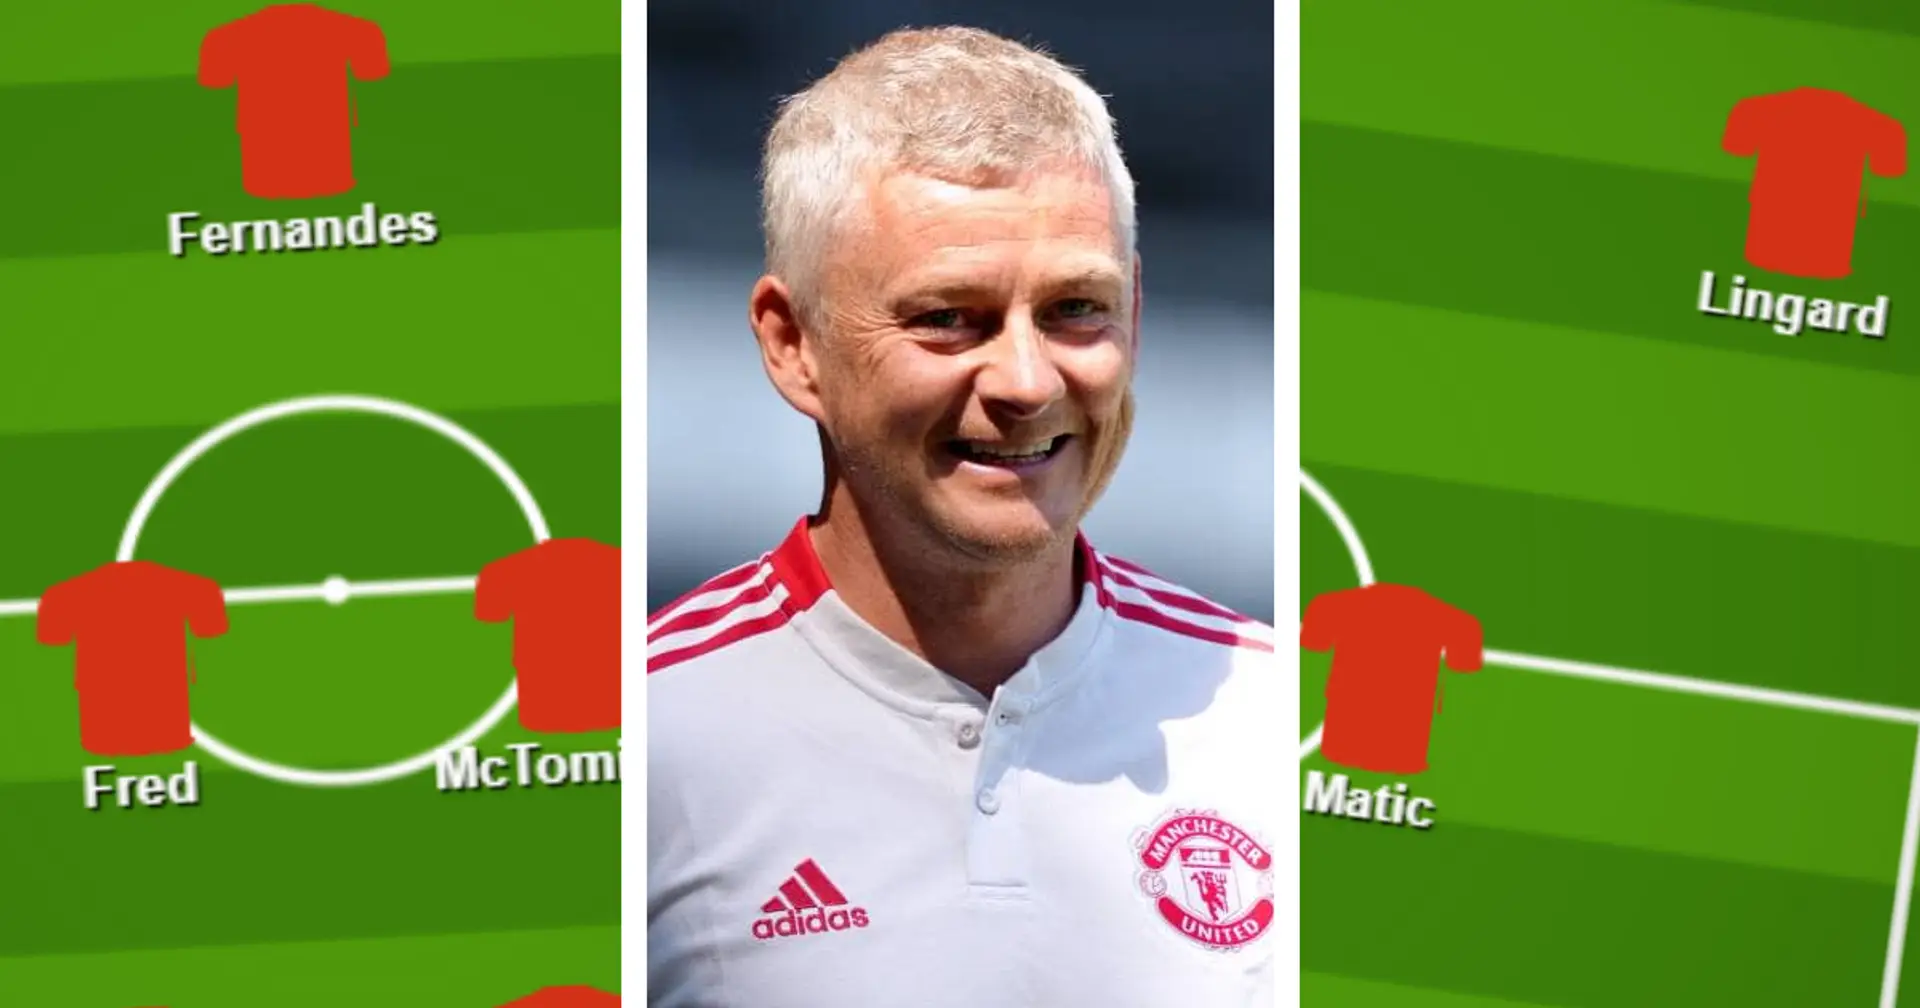 Comparing Ole's starting XI in his first Man United game to what it could be in 2021/22